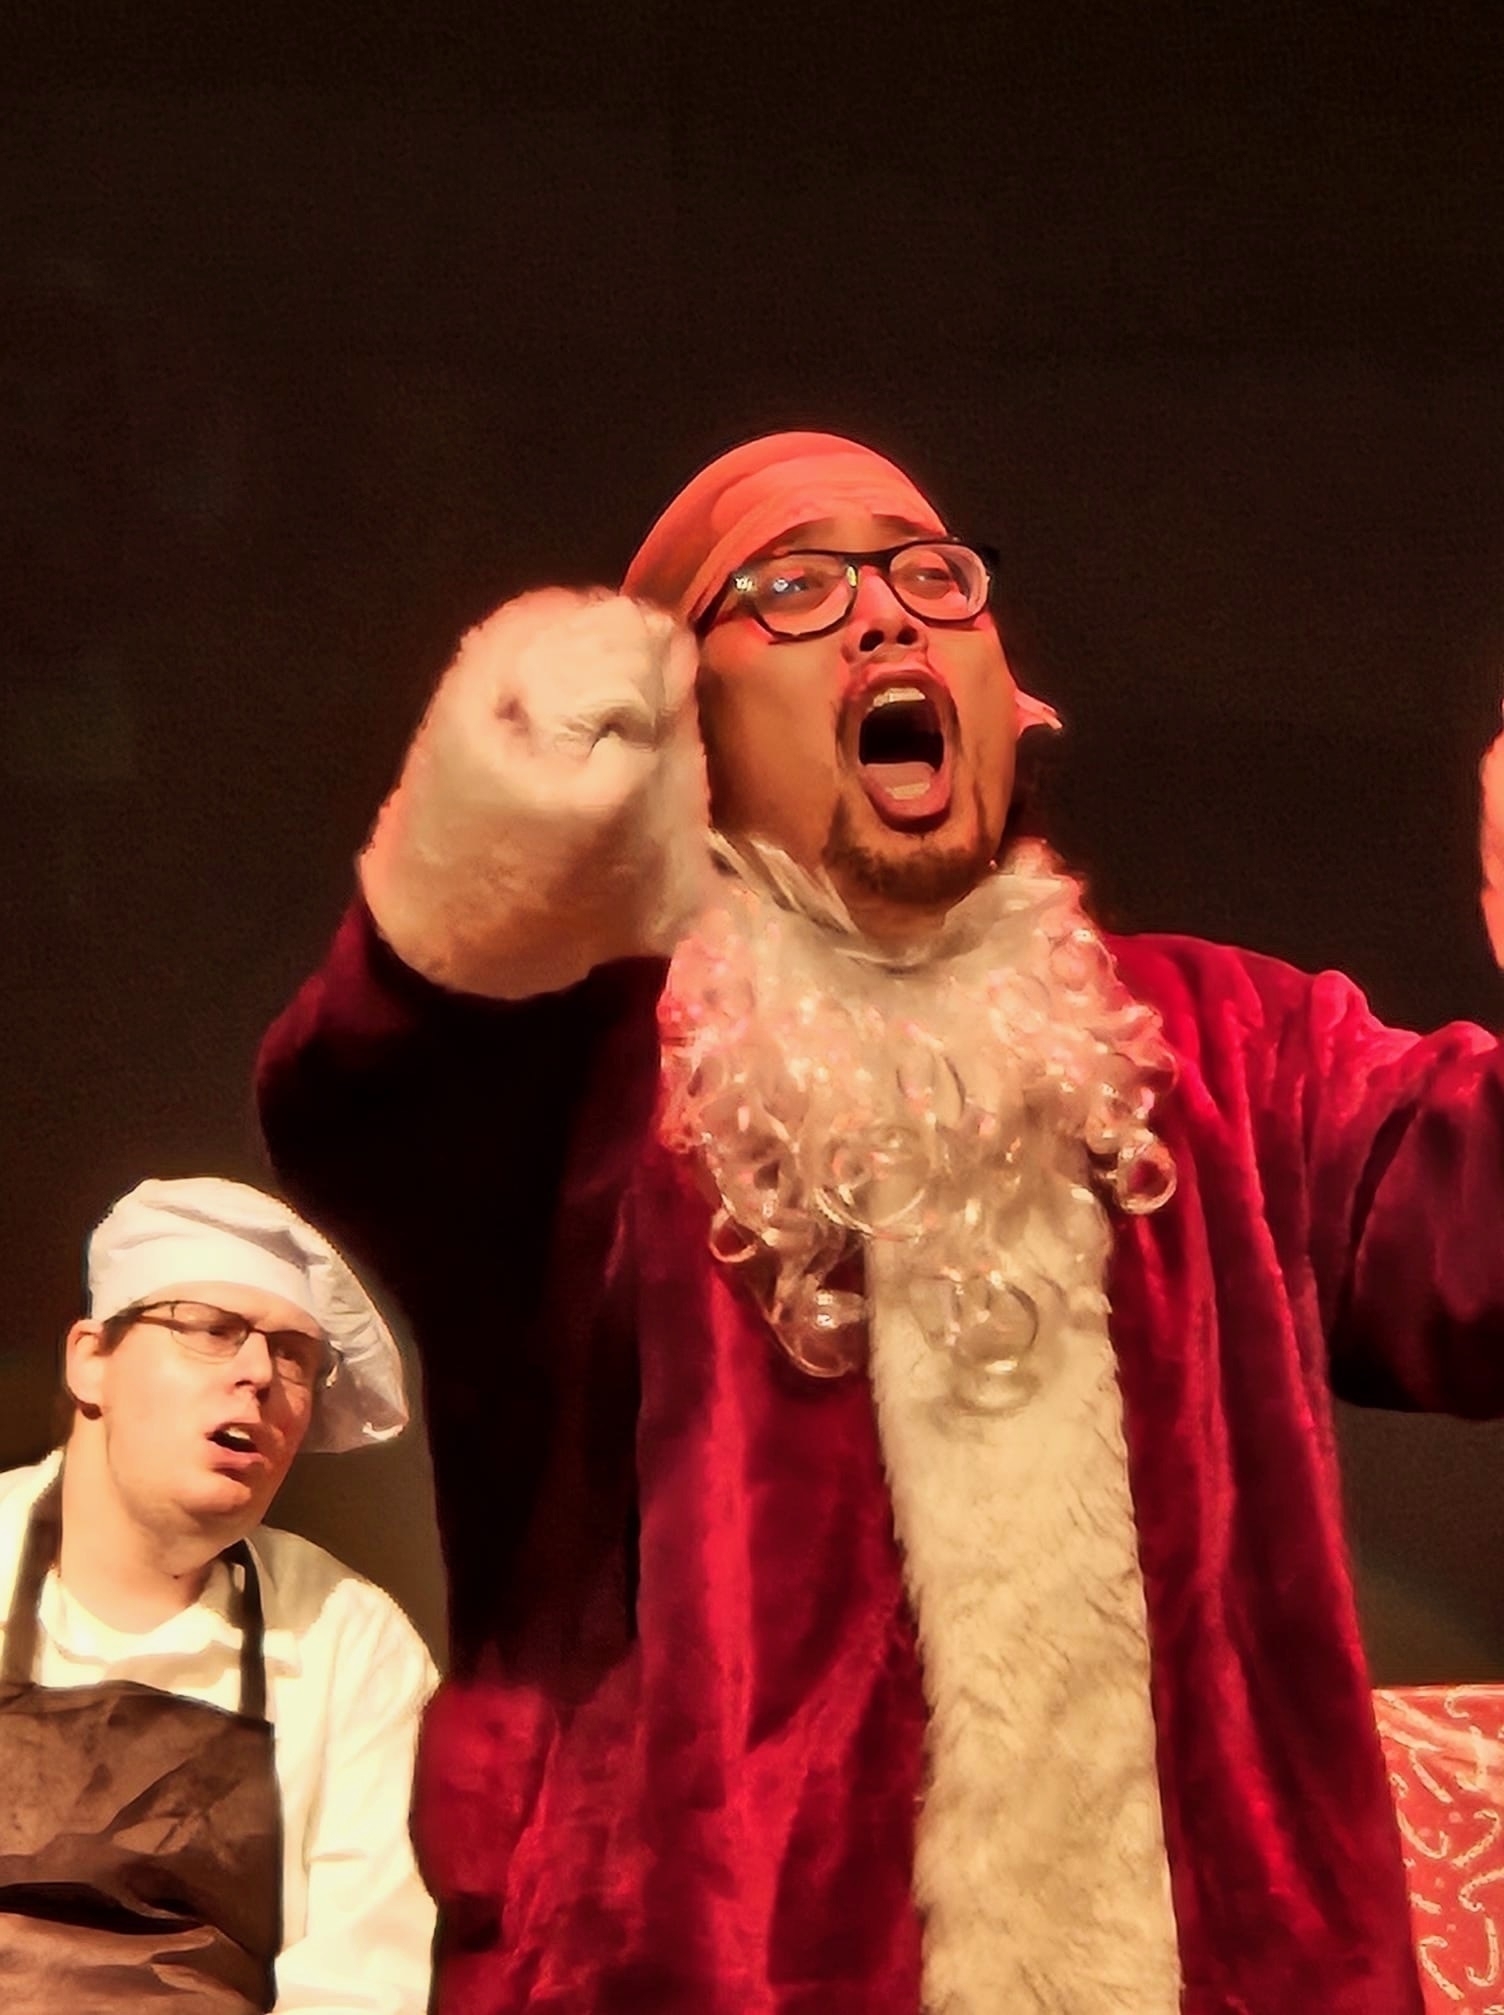 Two actors on stage, one in the foreground wearing a red costume with a white beard and glasses, appearing surprised or animated; the other in the background wearing a white chef hat and apron with a quizzical expression.